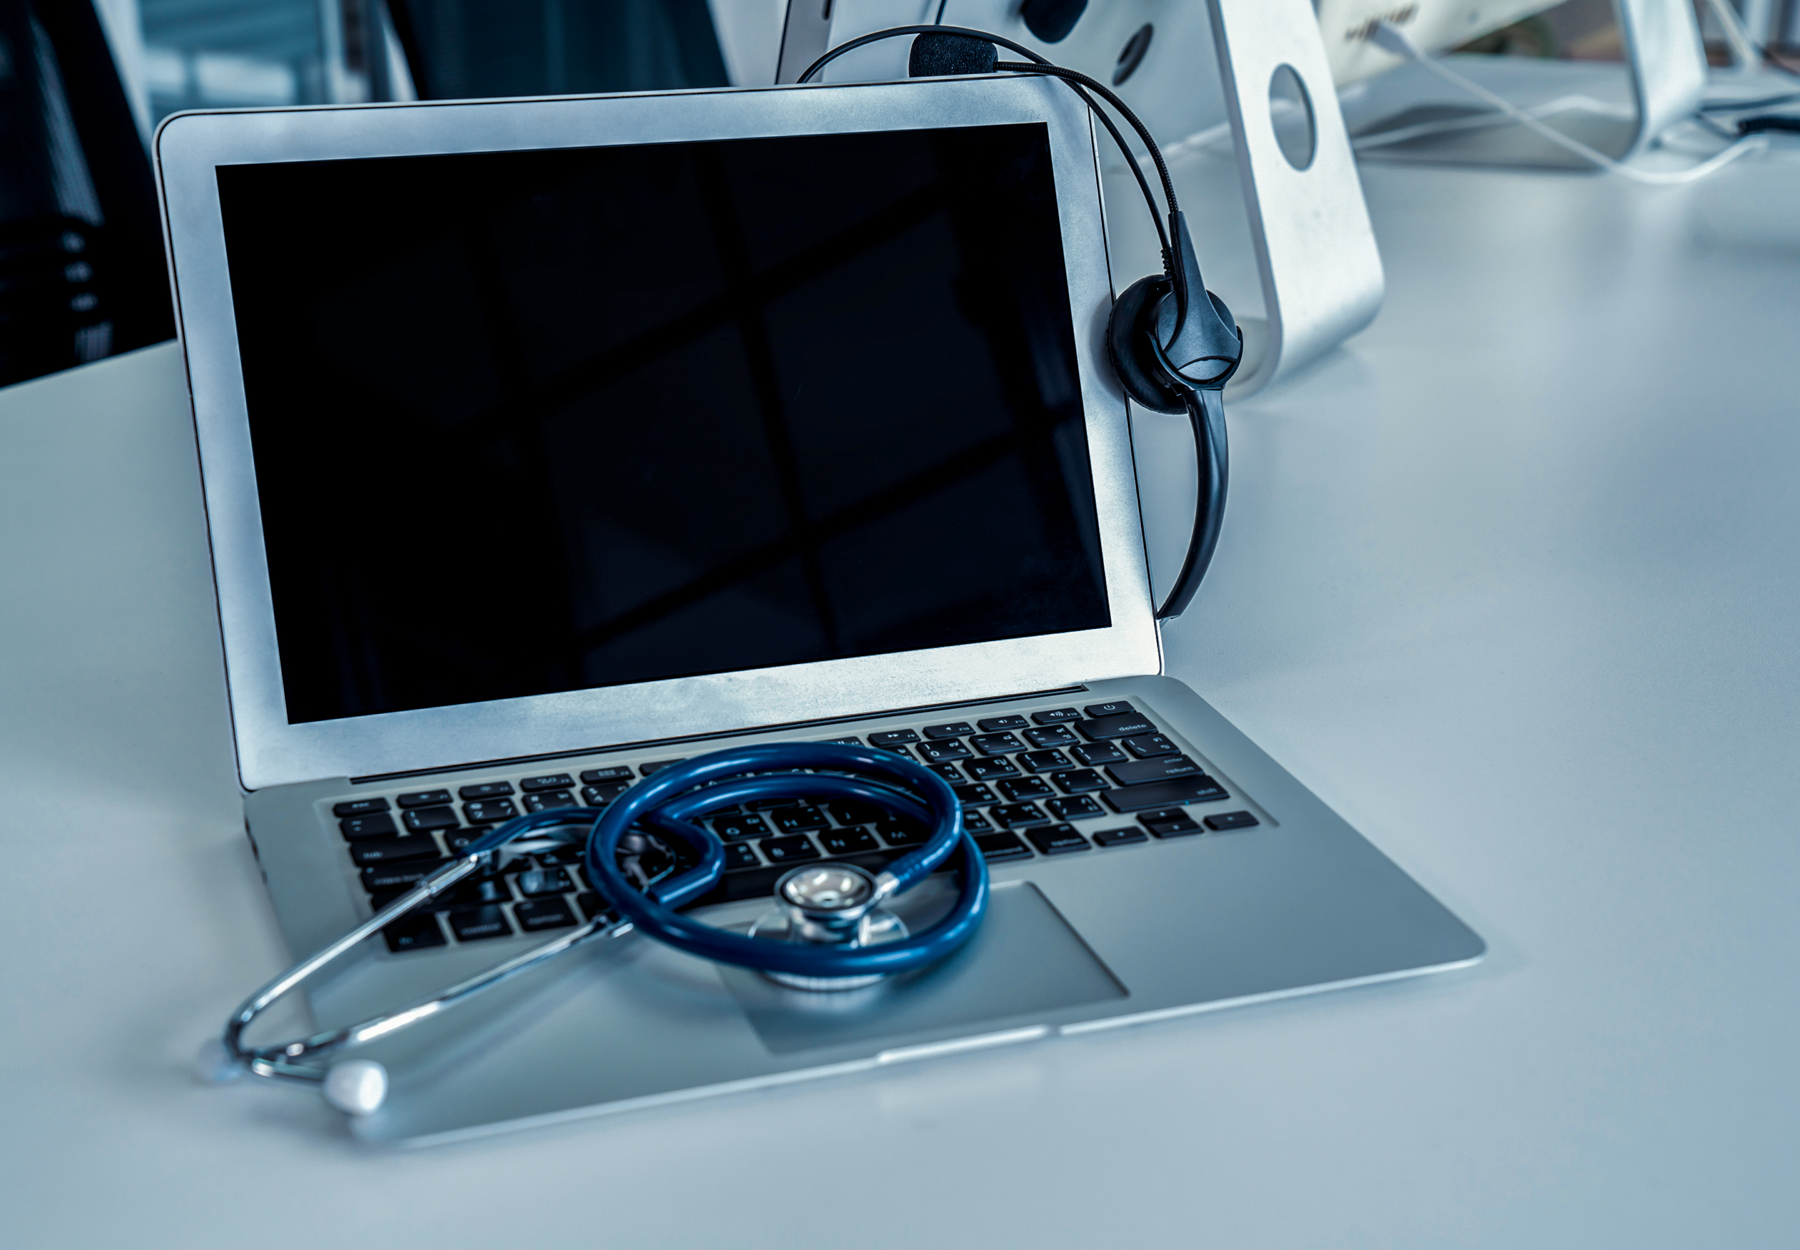 Stock image of headset and stethoscope at clinic ready for online video call with patient. Concept of telehealth and telemedicine service.